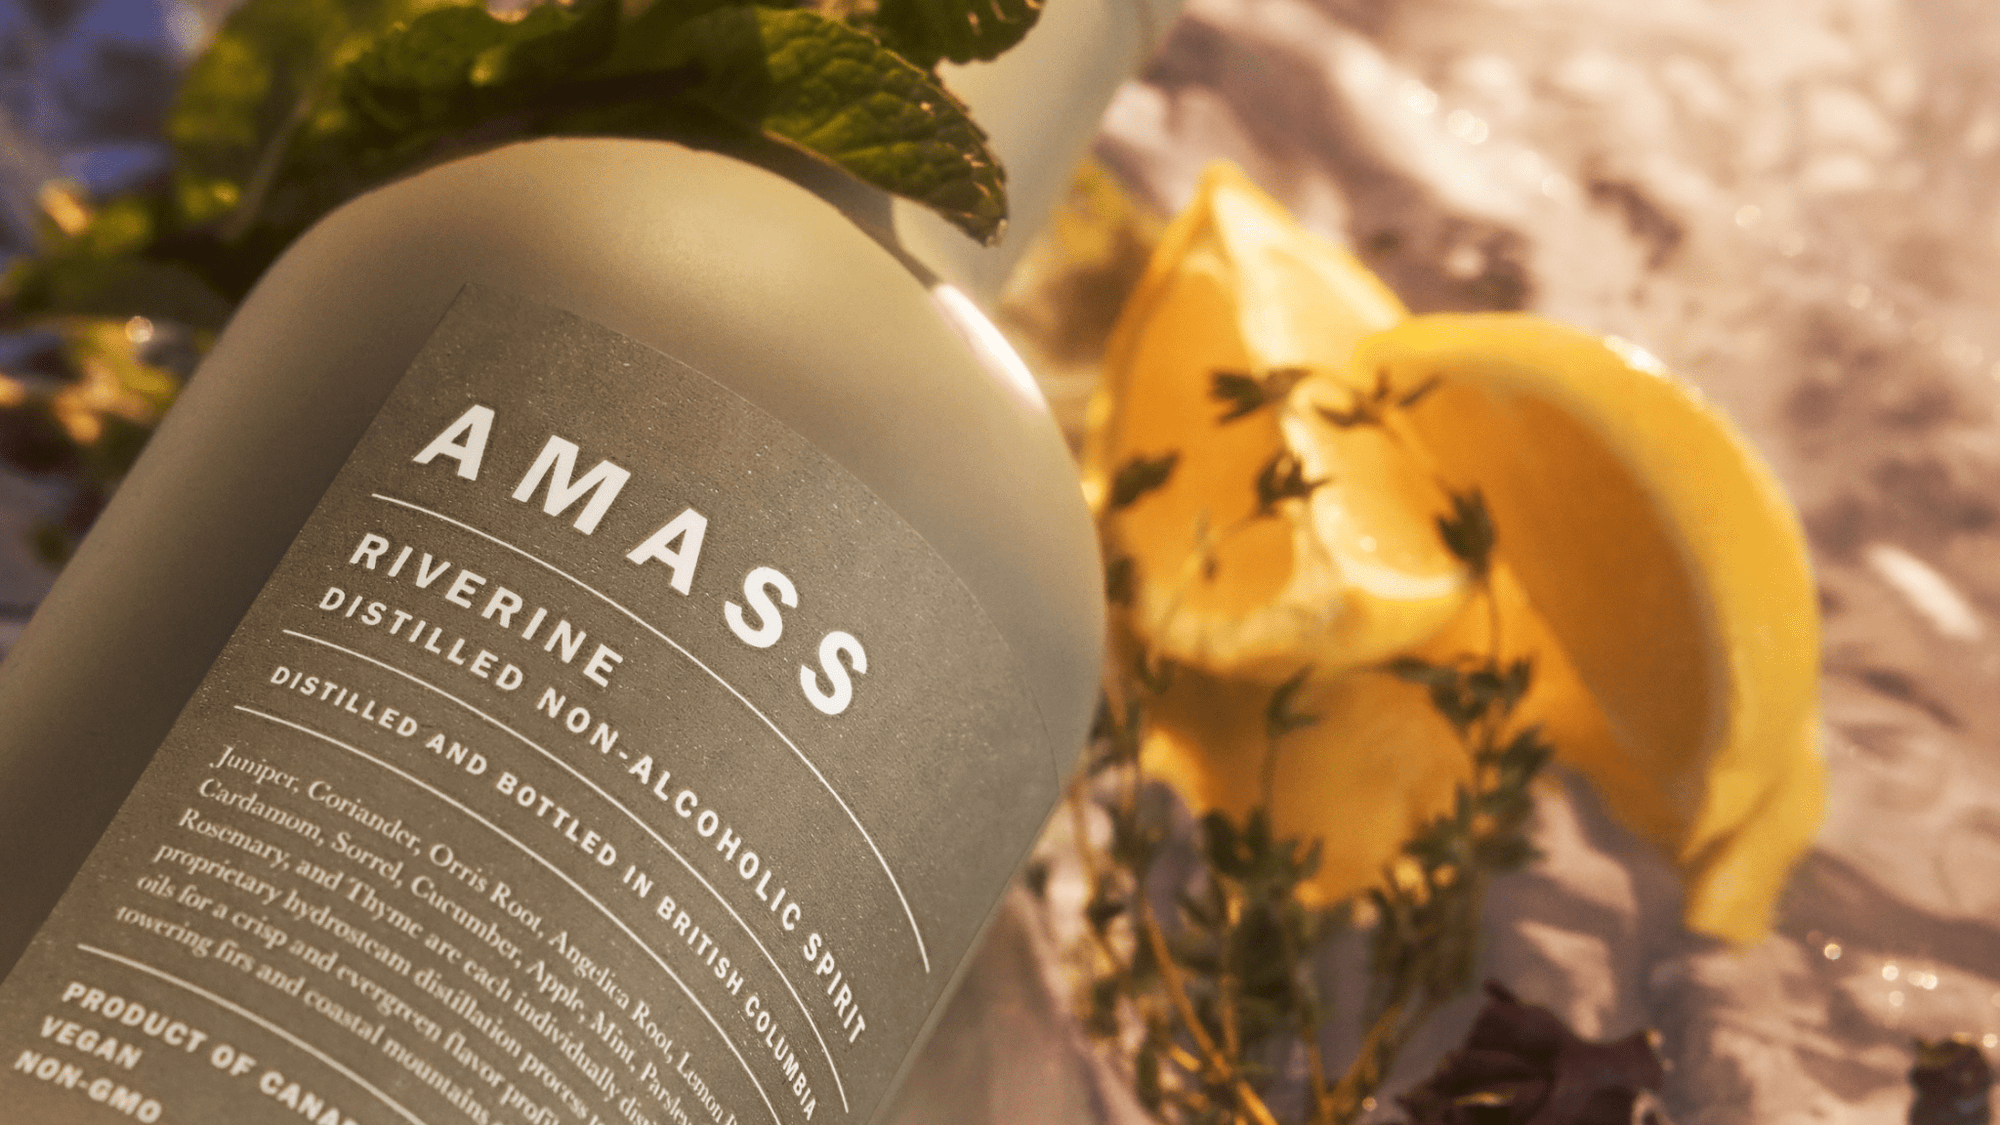 Q&A with Morgan McLachlan, co-founder and Master Distiller of AMASS botanics - Boisson